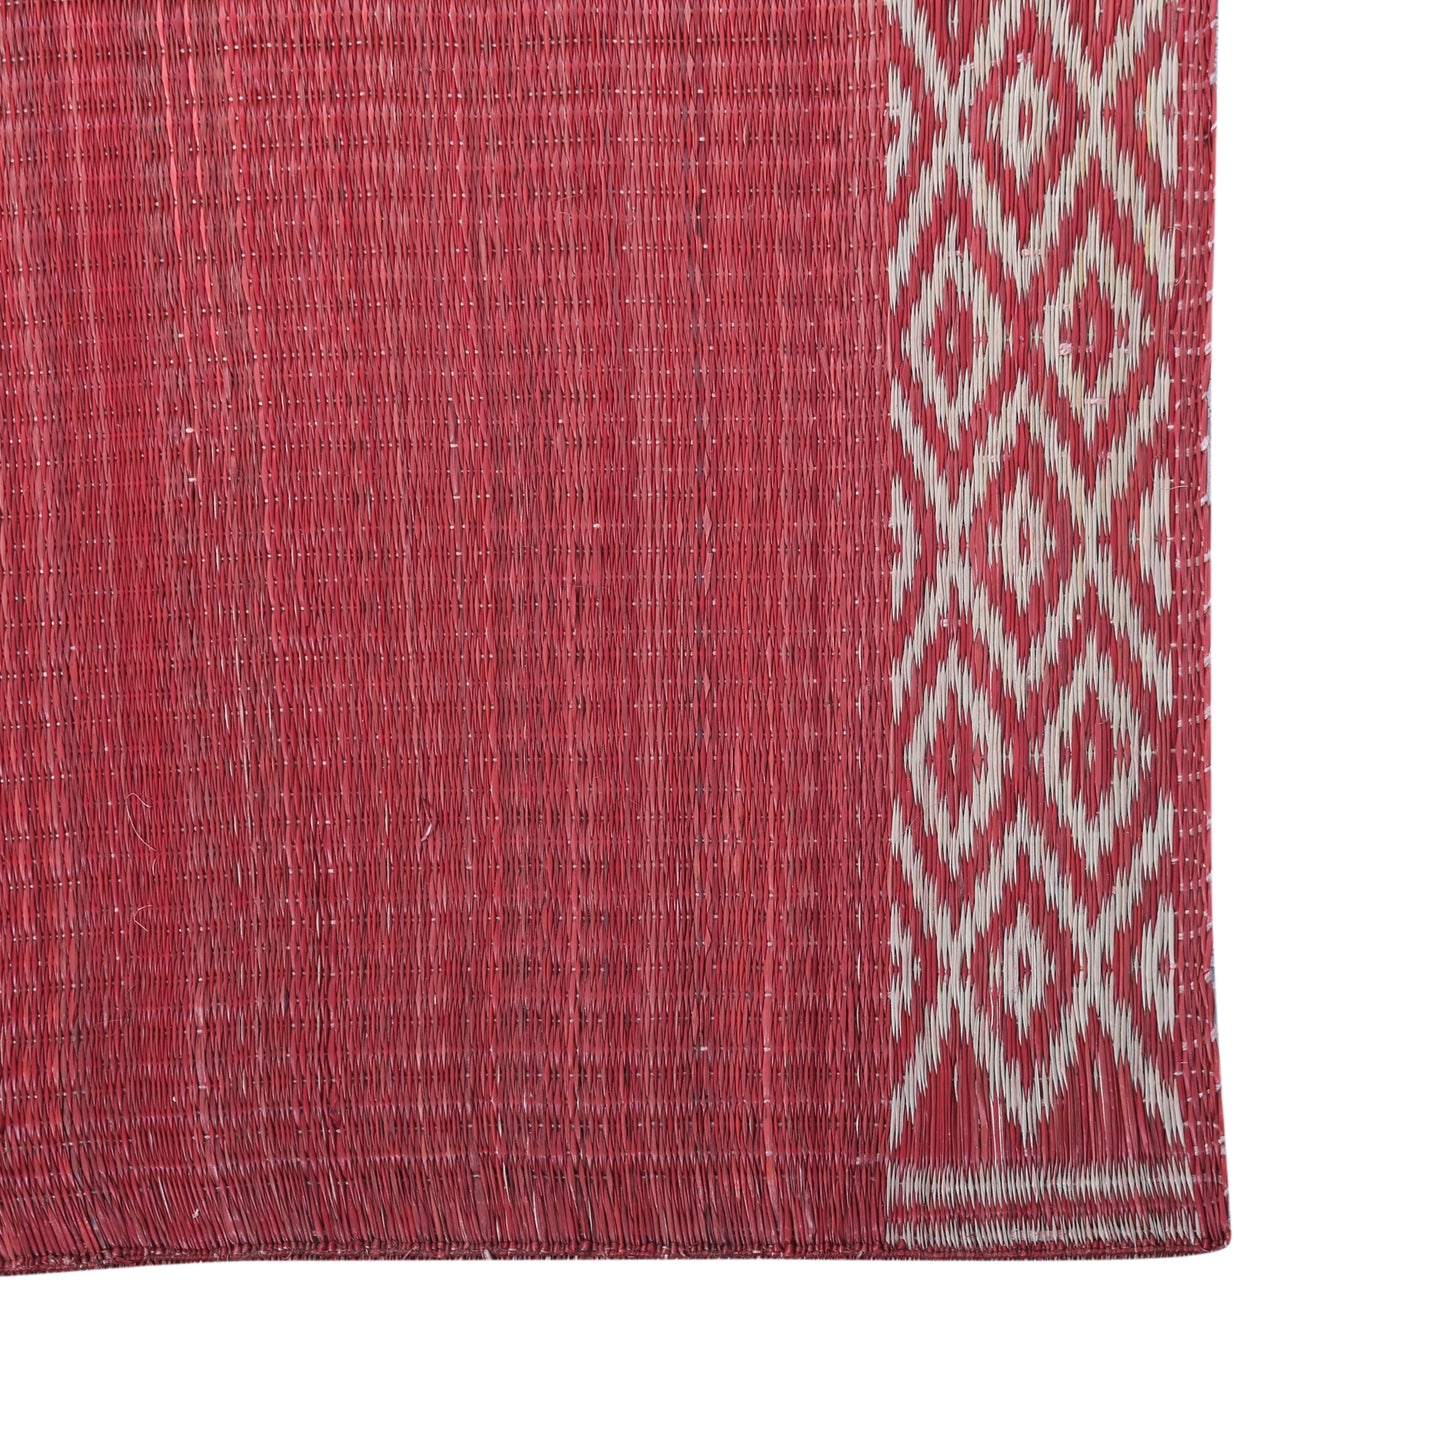 Masland Madurkathi Table Mat Set: A Superfine Premium Madurkathi Grass Handwoven Designer Dining Table Mat  Set (12×18 inches) with Runner(12×49 inches) Heat Resistant Eco-friendly Placemat with natural Border-MTM-05